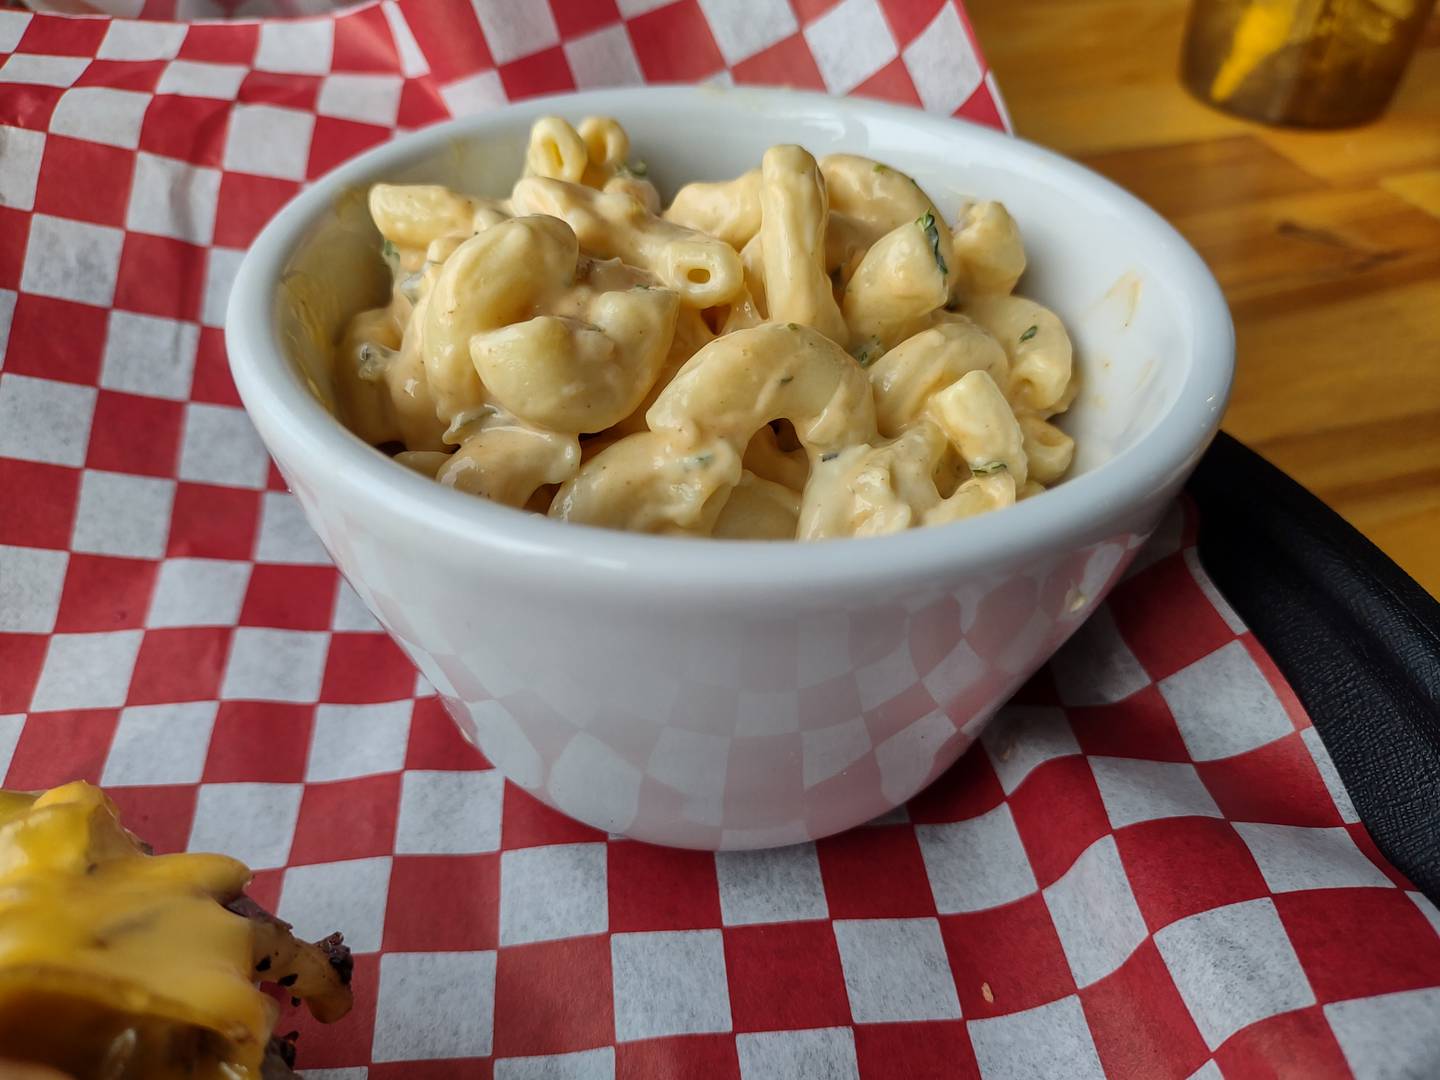 The macaroni salad served as a side at Weits Cafe in Morris.